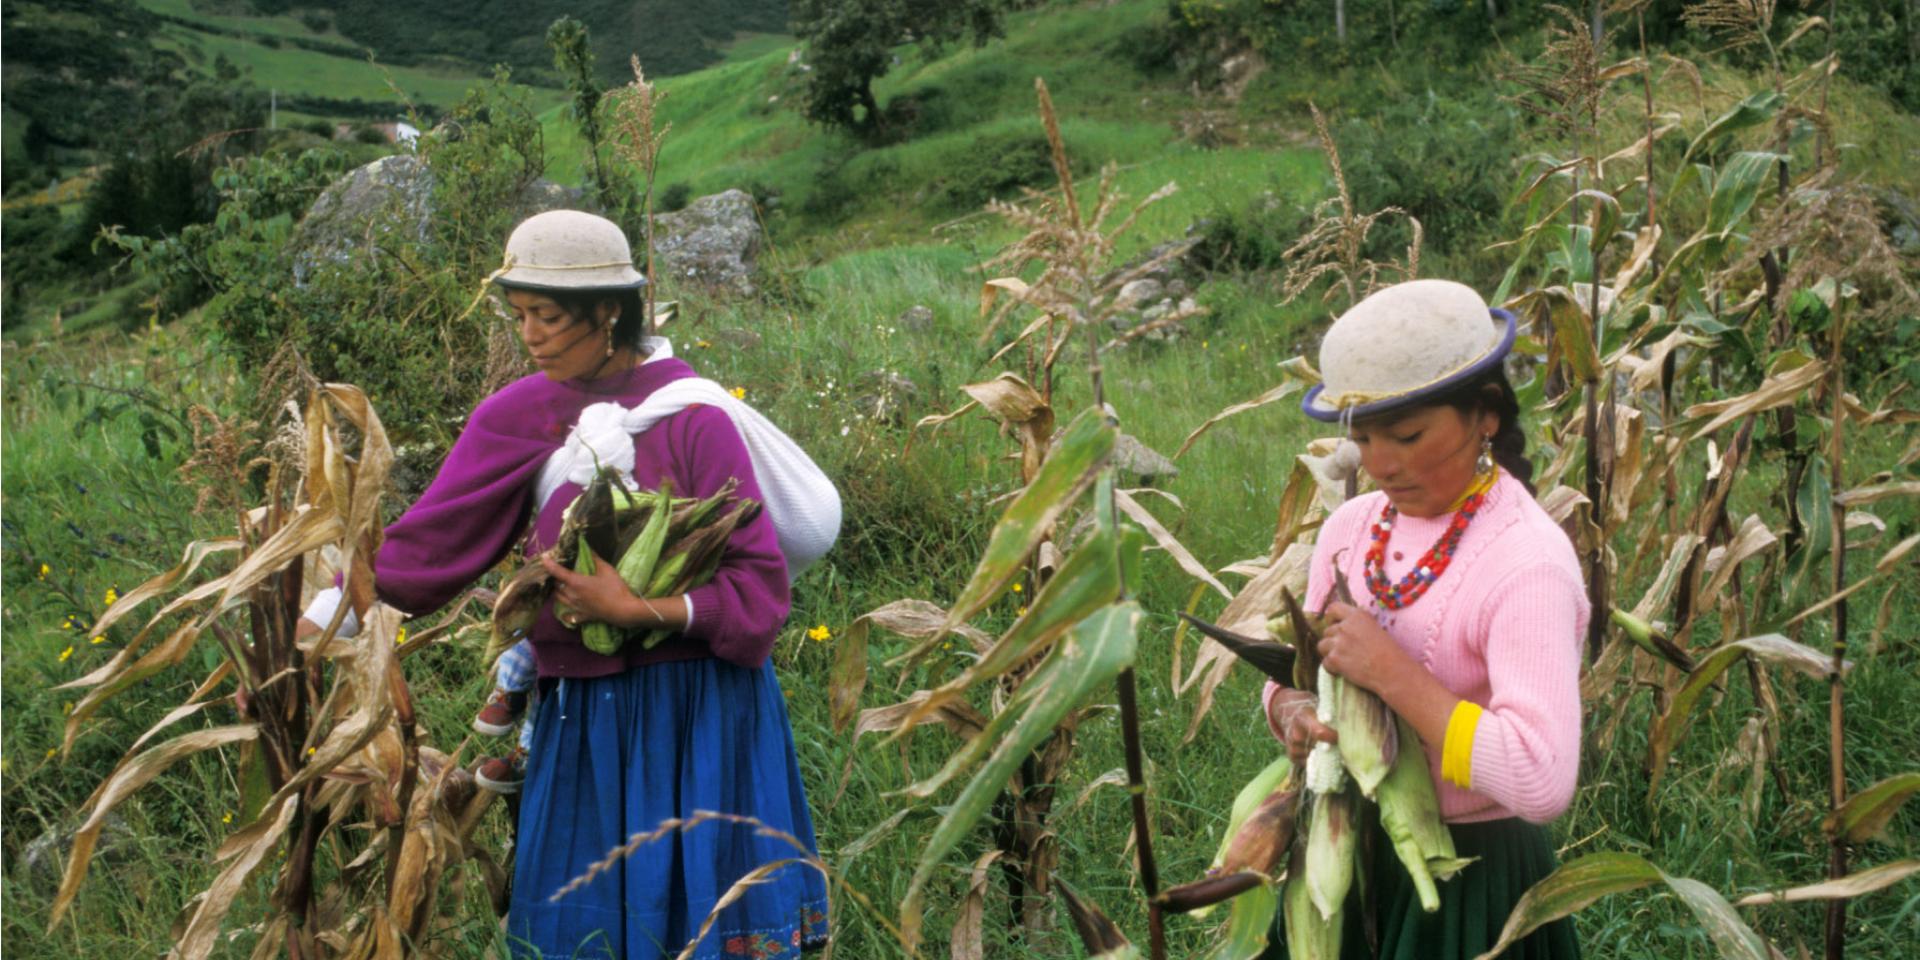 Women’s land ownership and decision-making